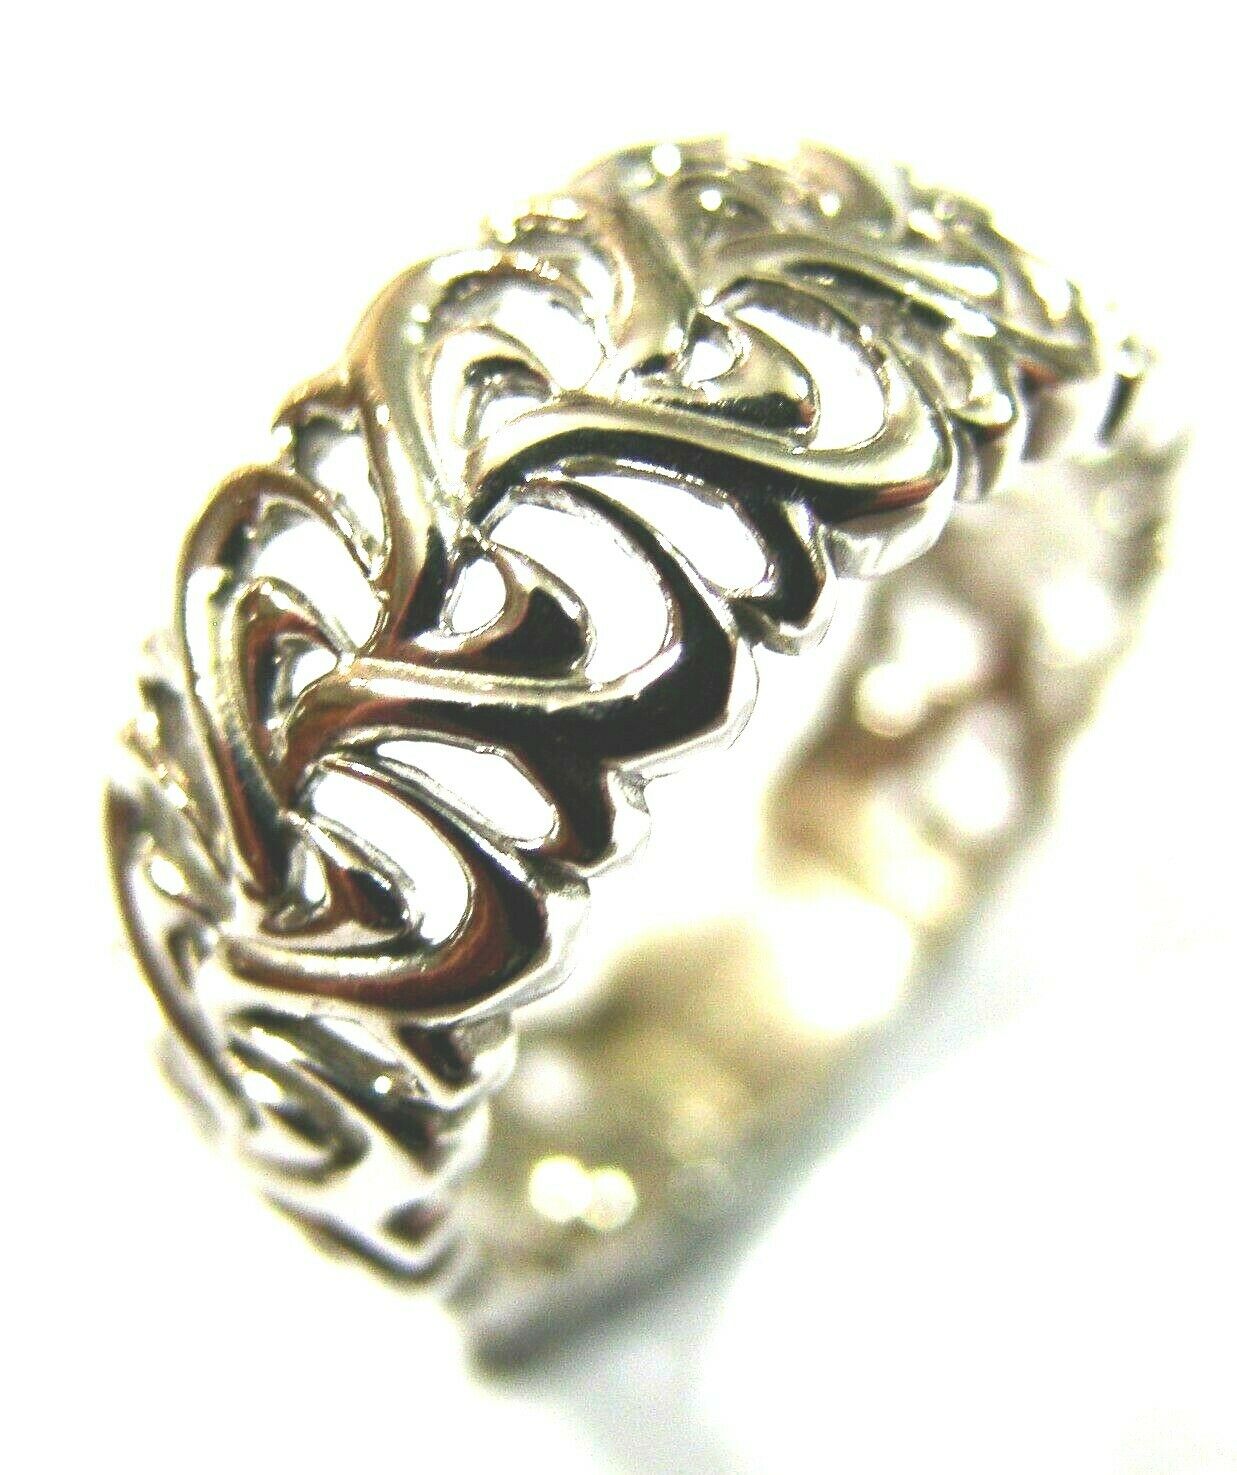 Genuine Size O 9ct 375 White Gold Wide Flower Filigree Ring